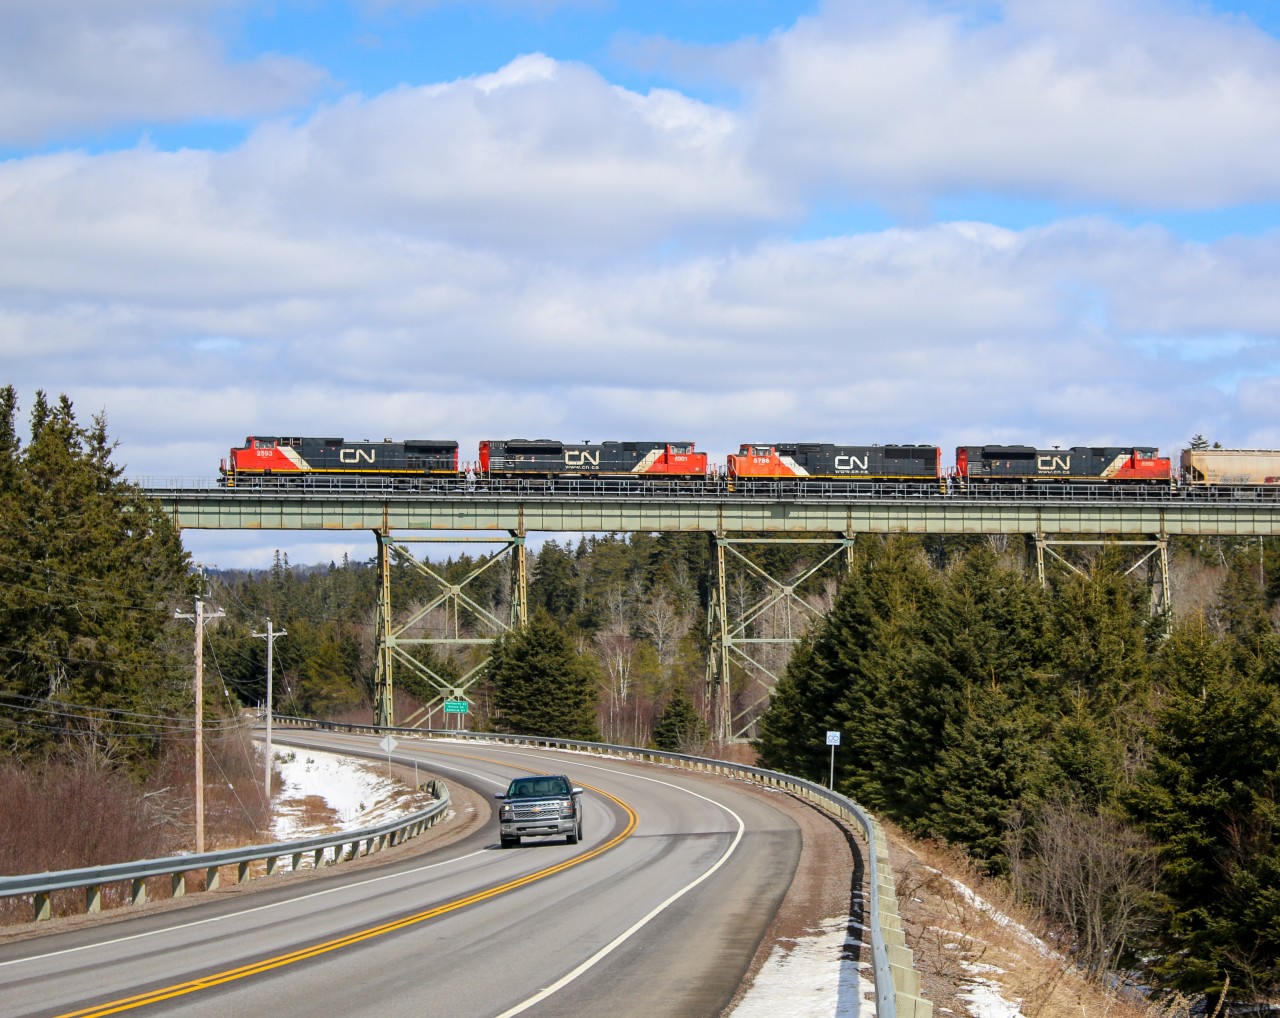 CN 2593 leads CN 8901, CN 5786,CN 8960 across the rail bridge that crosses highway #4 in Folly Mountain heading west towards Amherst